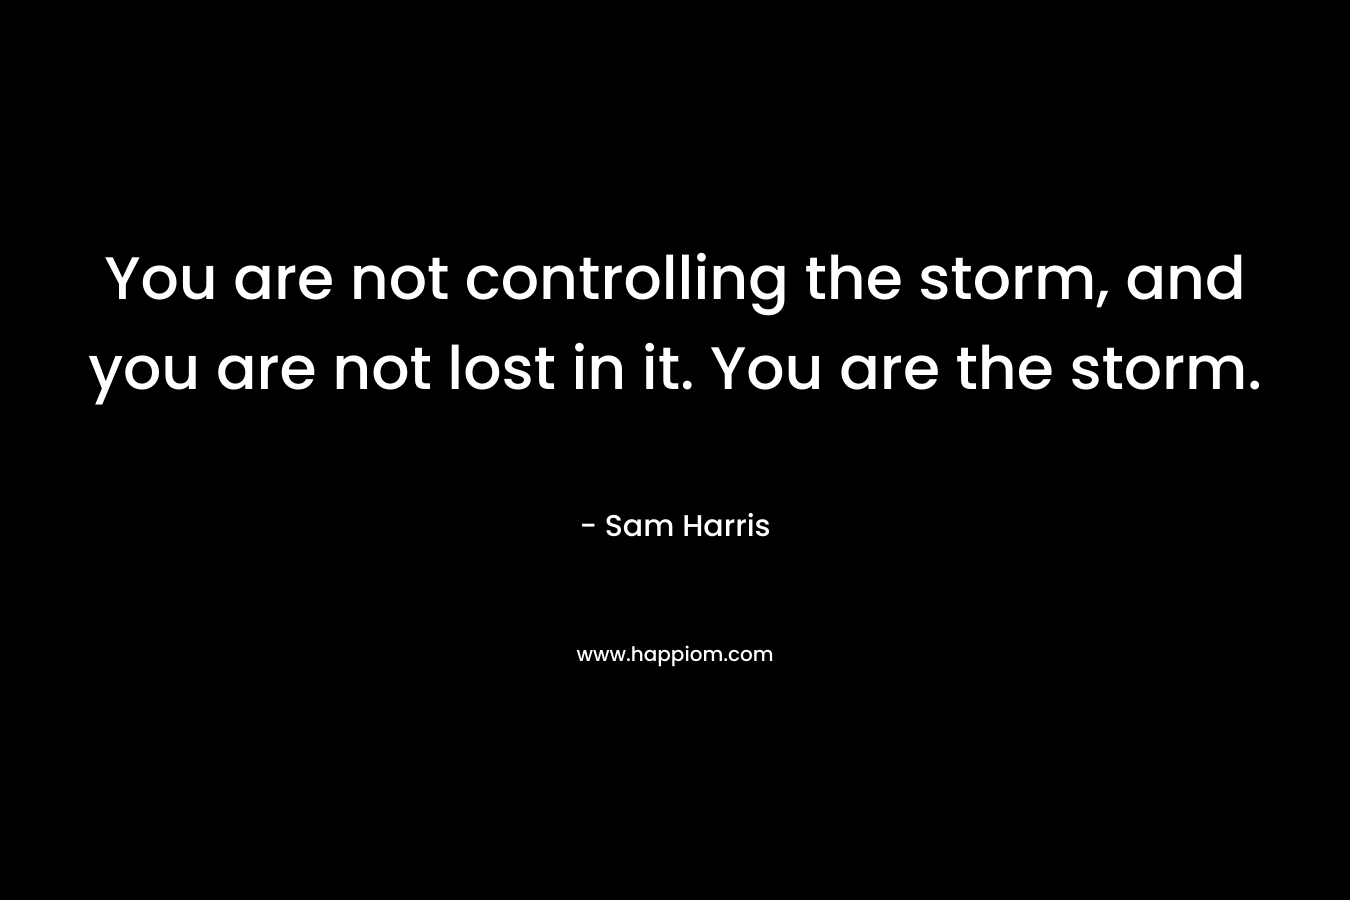 You are not controlling the storm, and you are not lost in it. You are the storm.